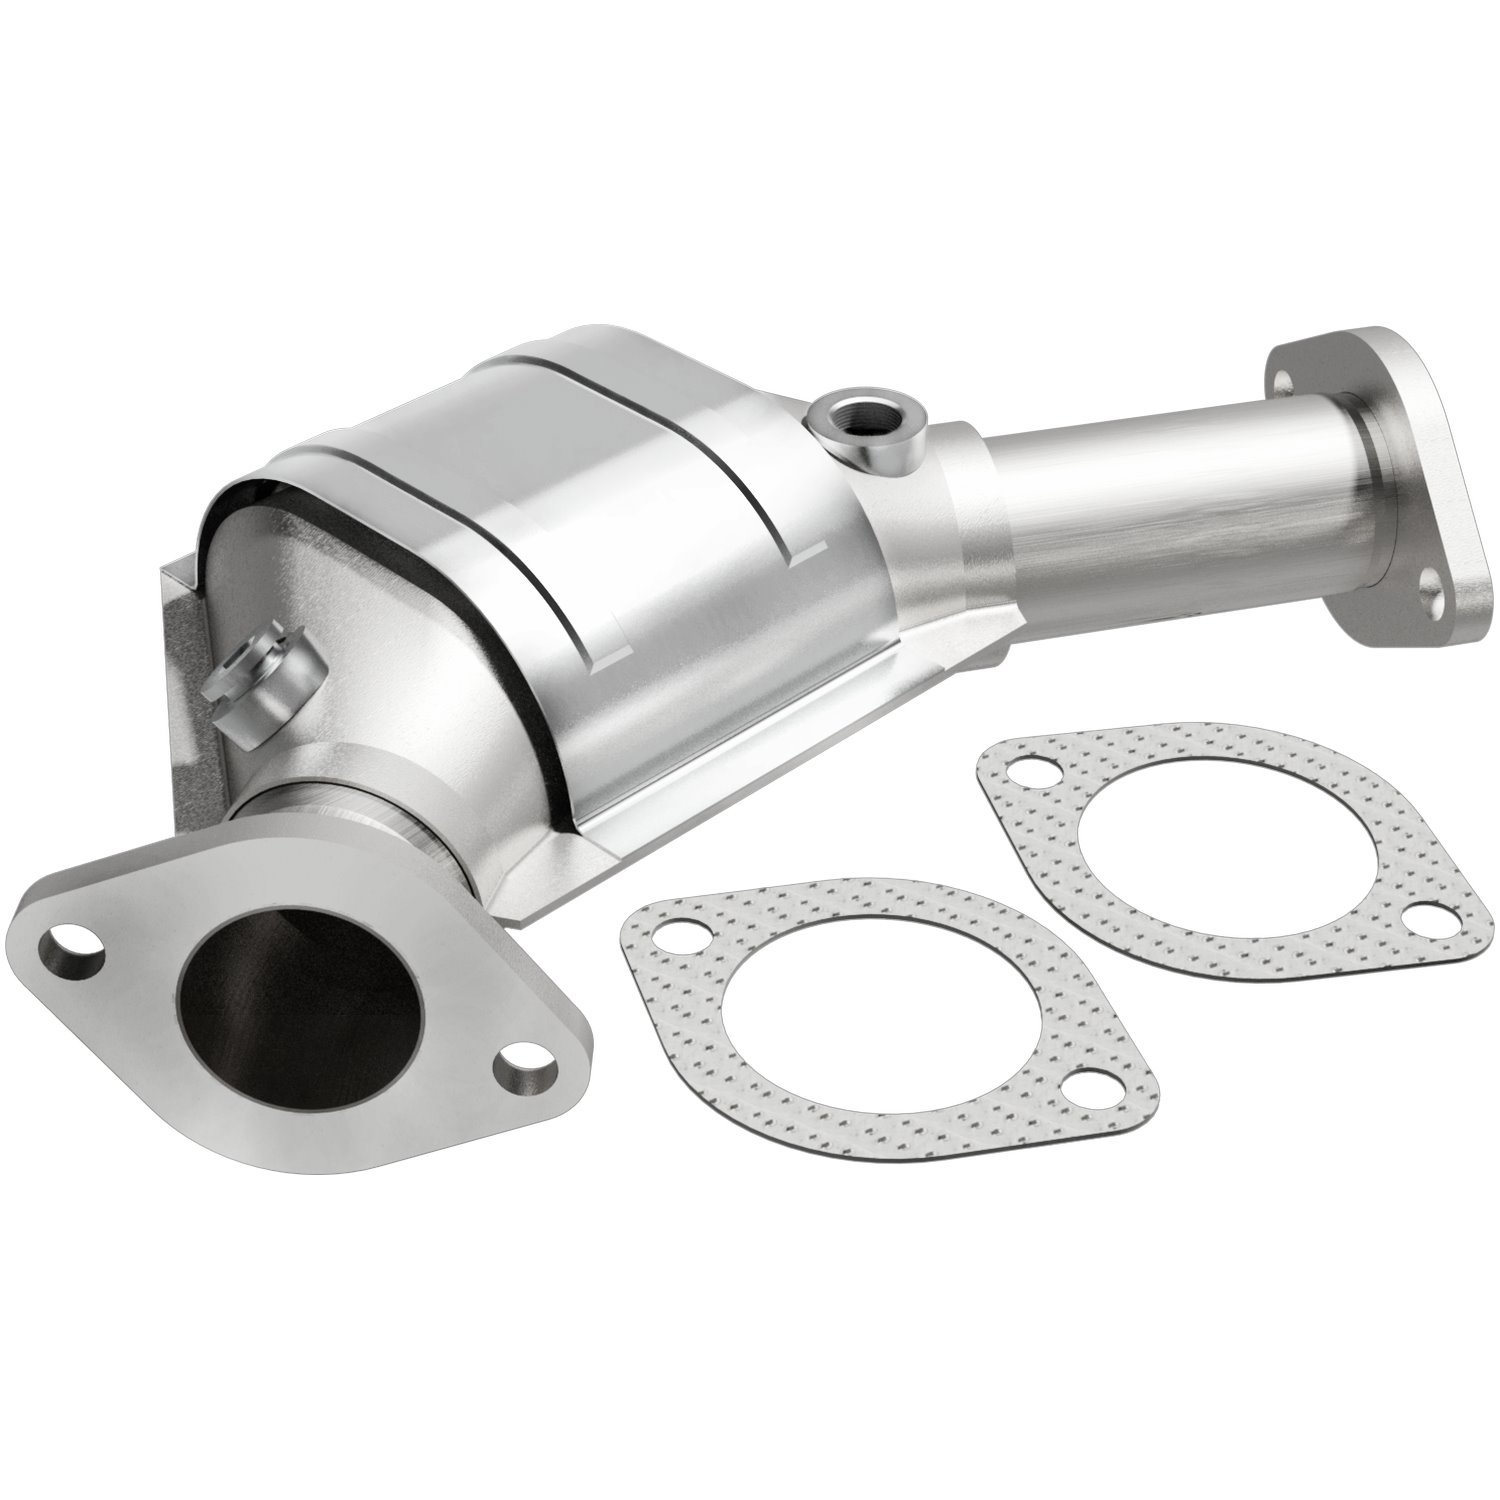 HM Grade Federal / EPA Compliant Direct-Fit Catalytic Converter 23875